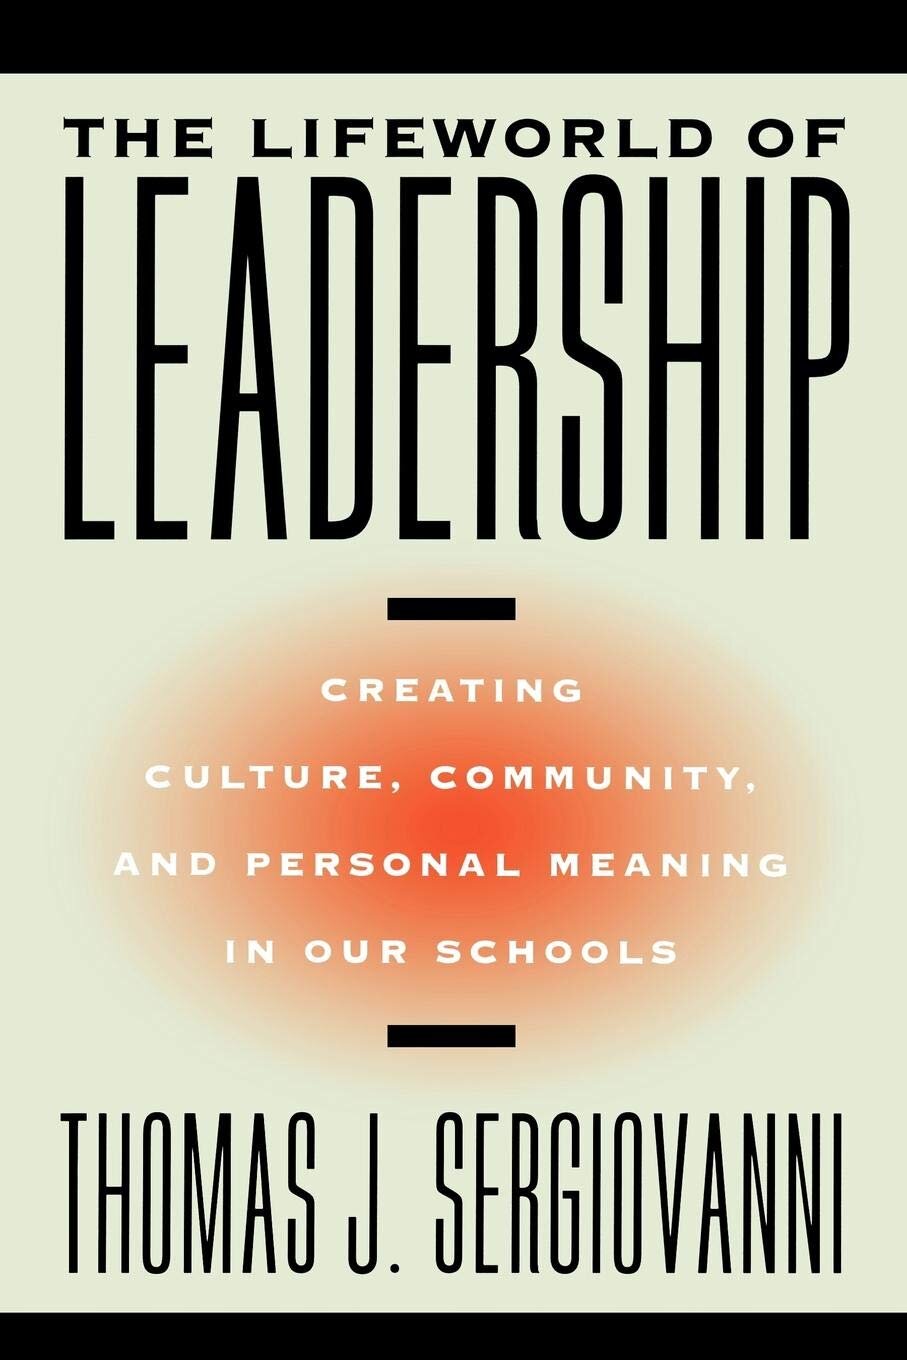 The Life World of Leadership: Creating Culture, Community, and Personal Meaning in Our School - Thomas Sergiovanni